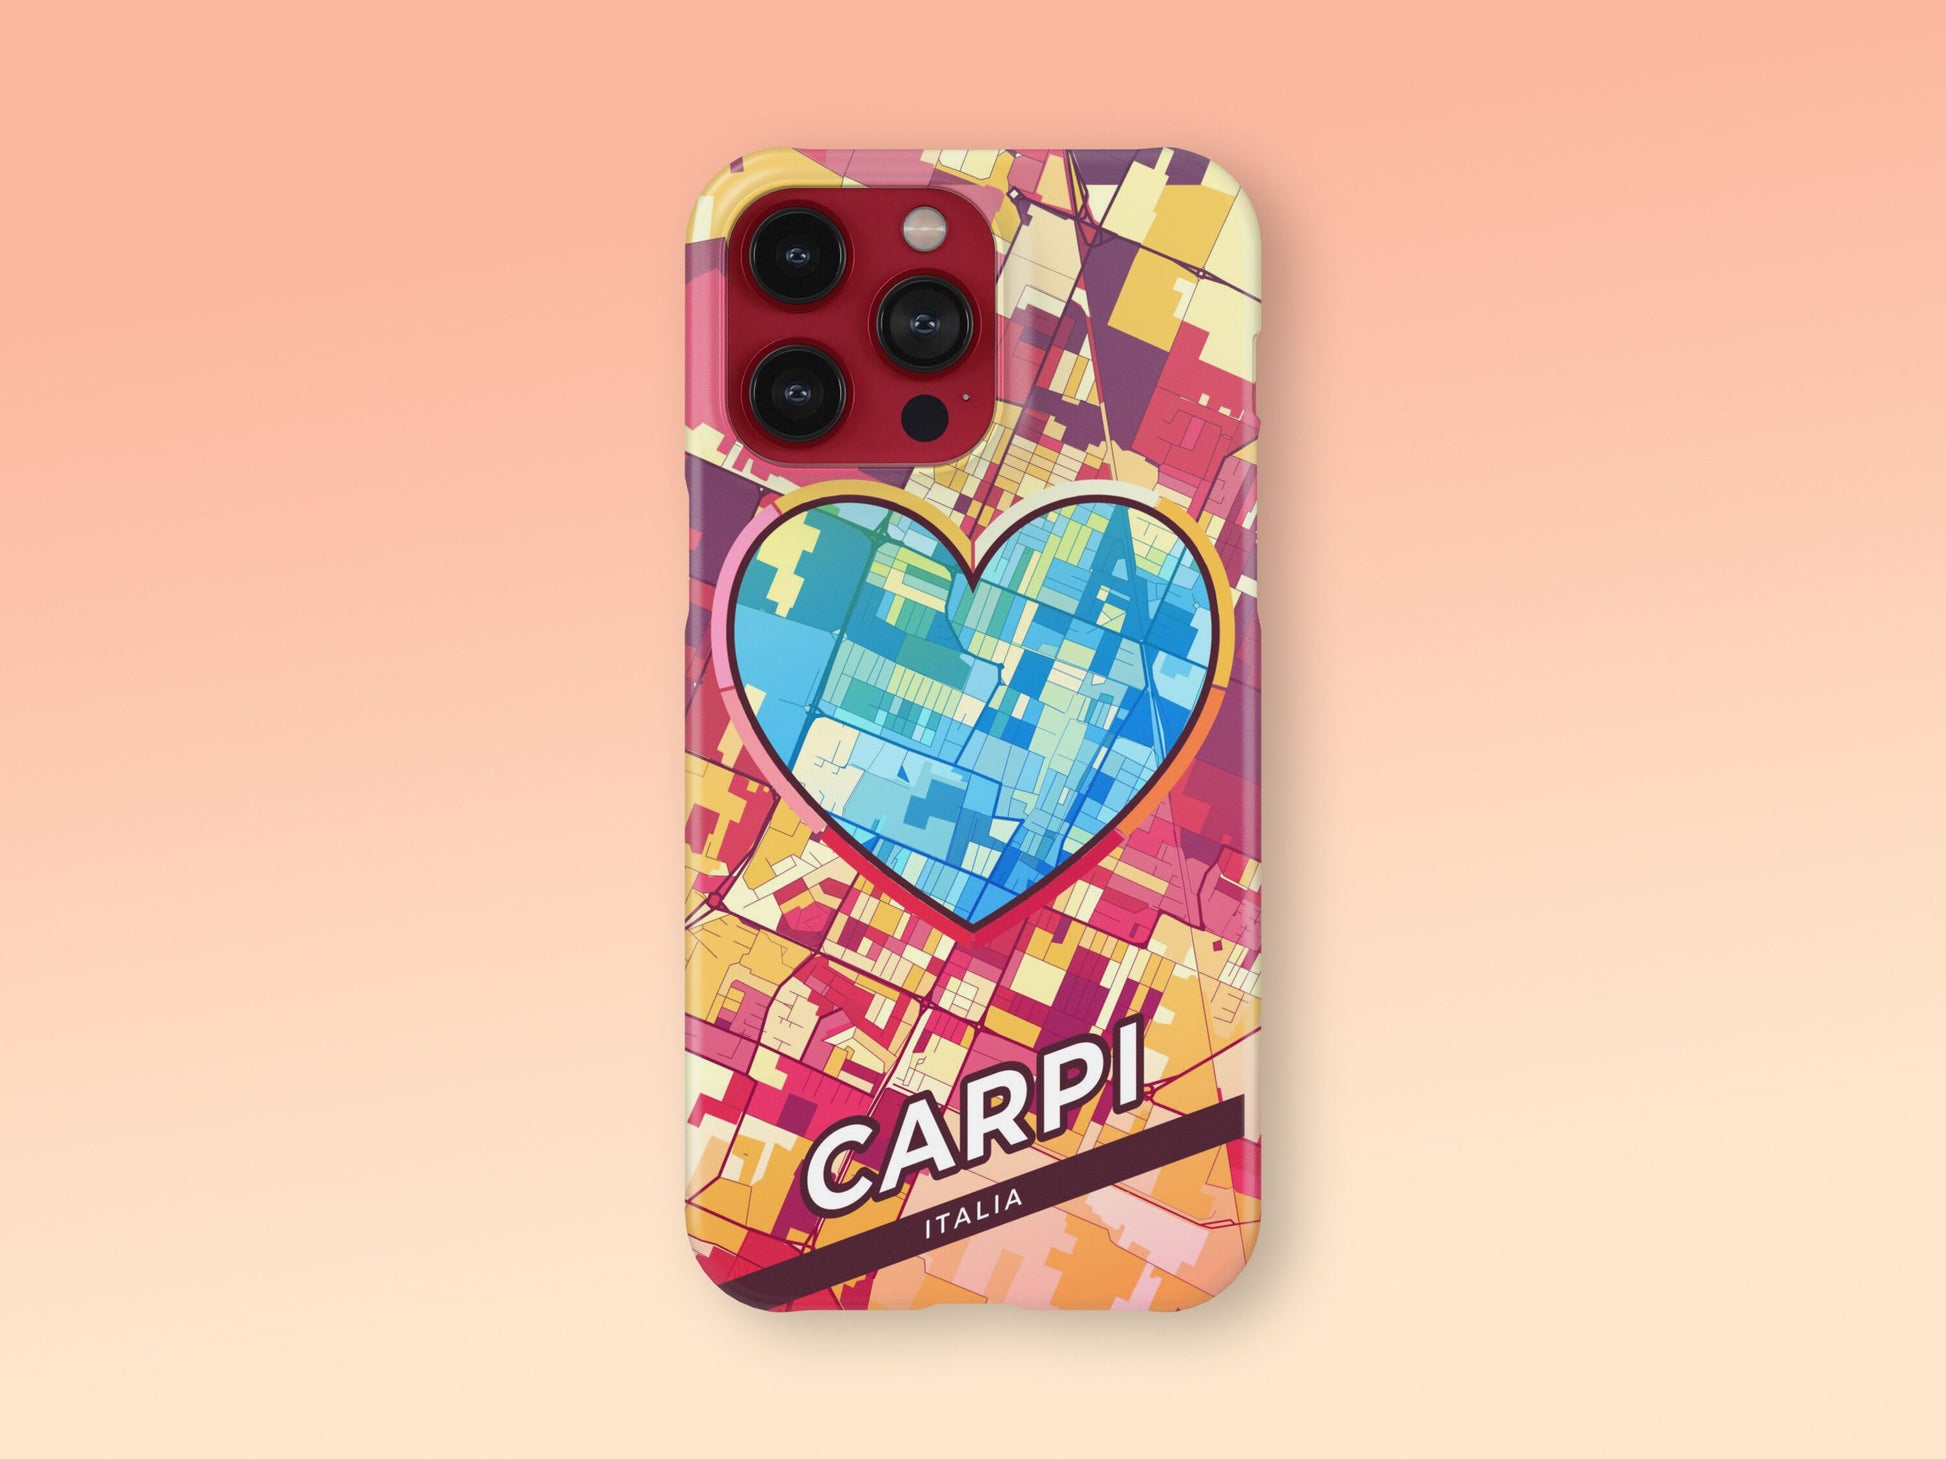 Carpi Italy slim phone case with colorful icon. Birthday, wedding or housewarming gift. Couple match cases. 2